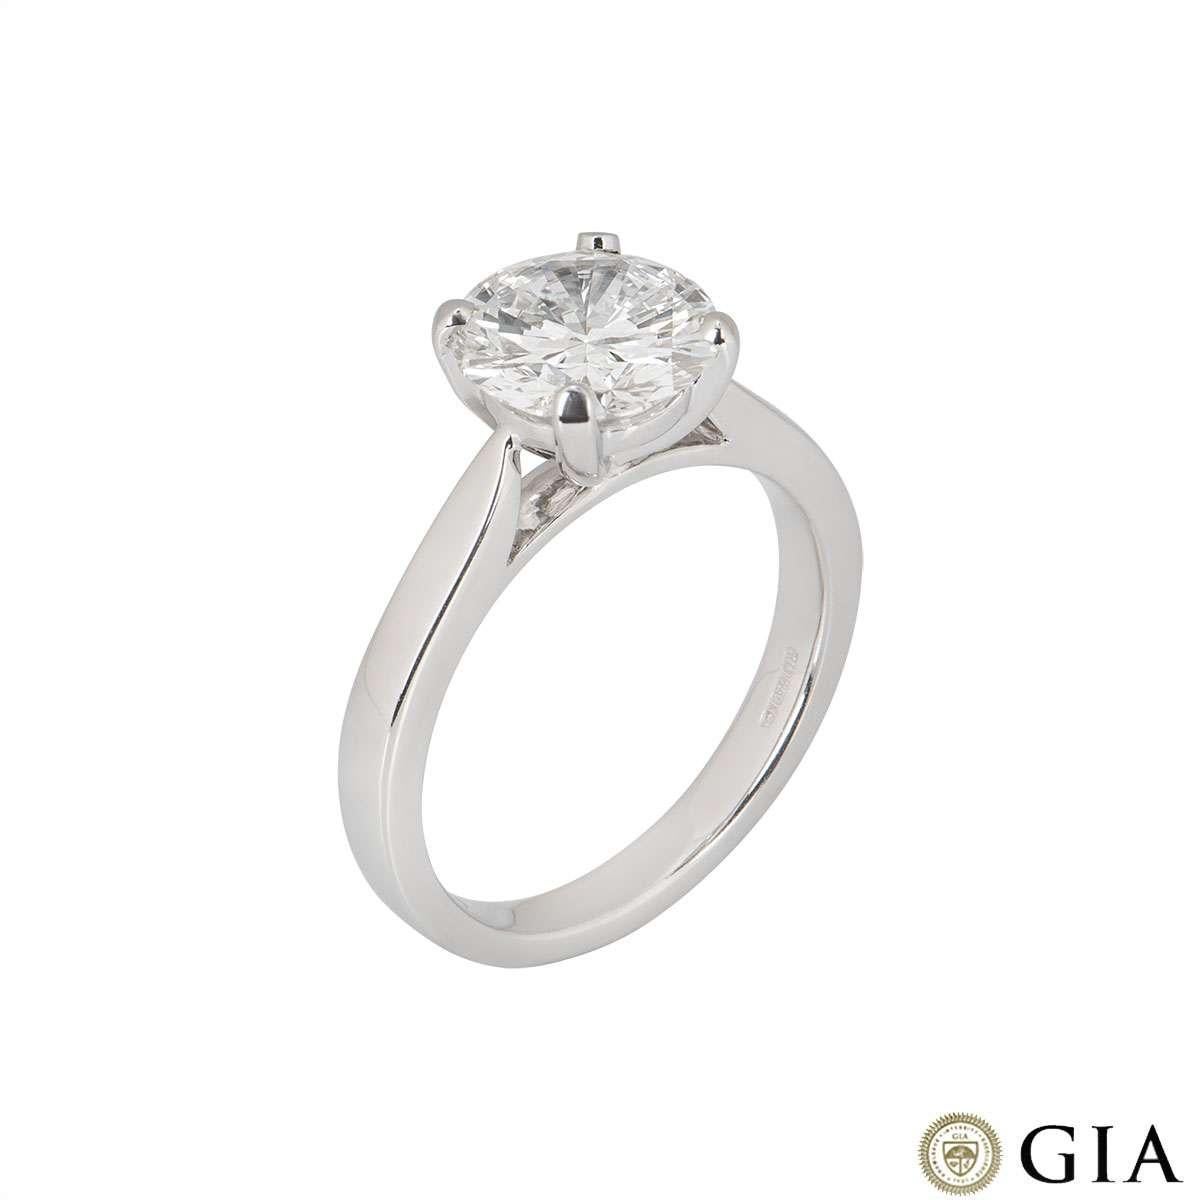 A beautiful 18k white gold diamond engagement ring. The central round brilliant cut diamond weighs 2.08ct, is E colour and VVS2 in clarity. The ring is currently a size UK M½/US 6.25/EU 53 but can be adjusted for a perfect fit. The ring has a gross